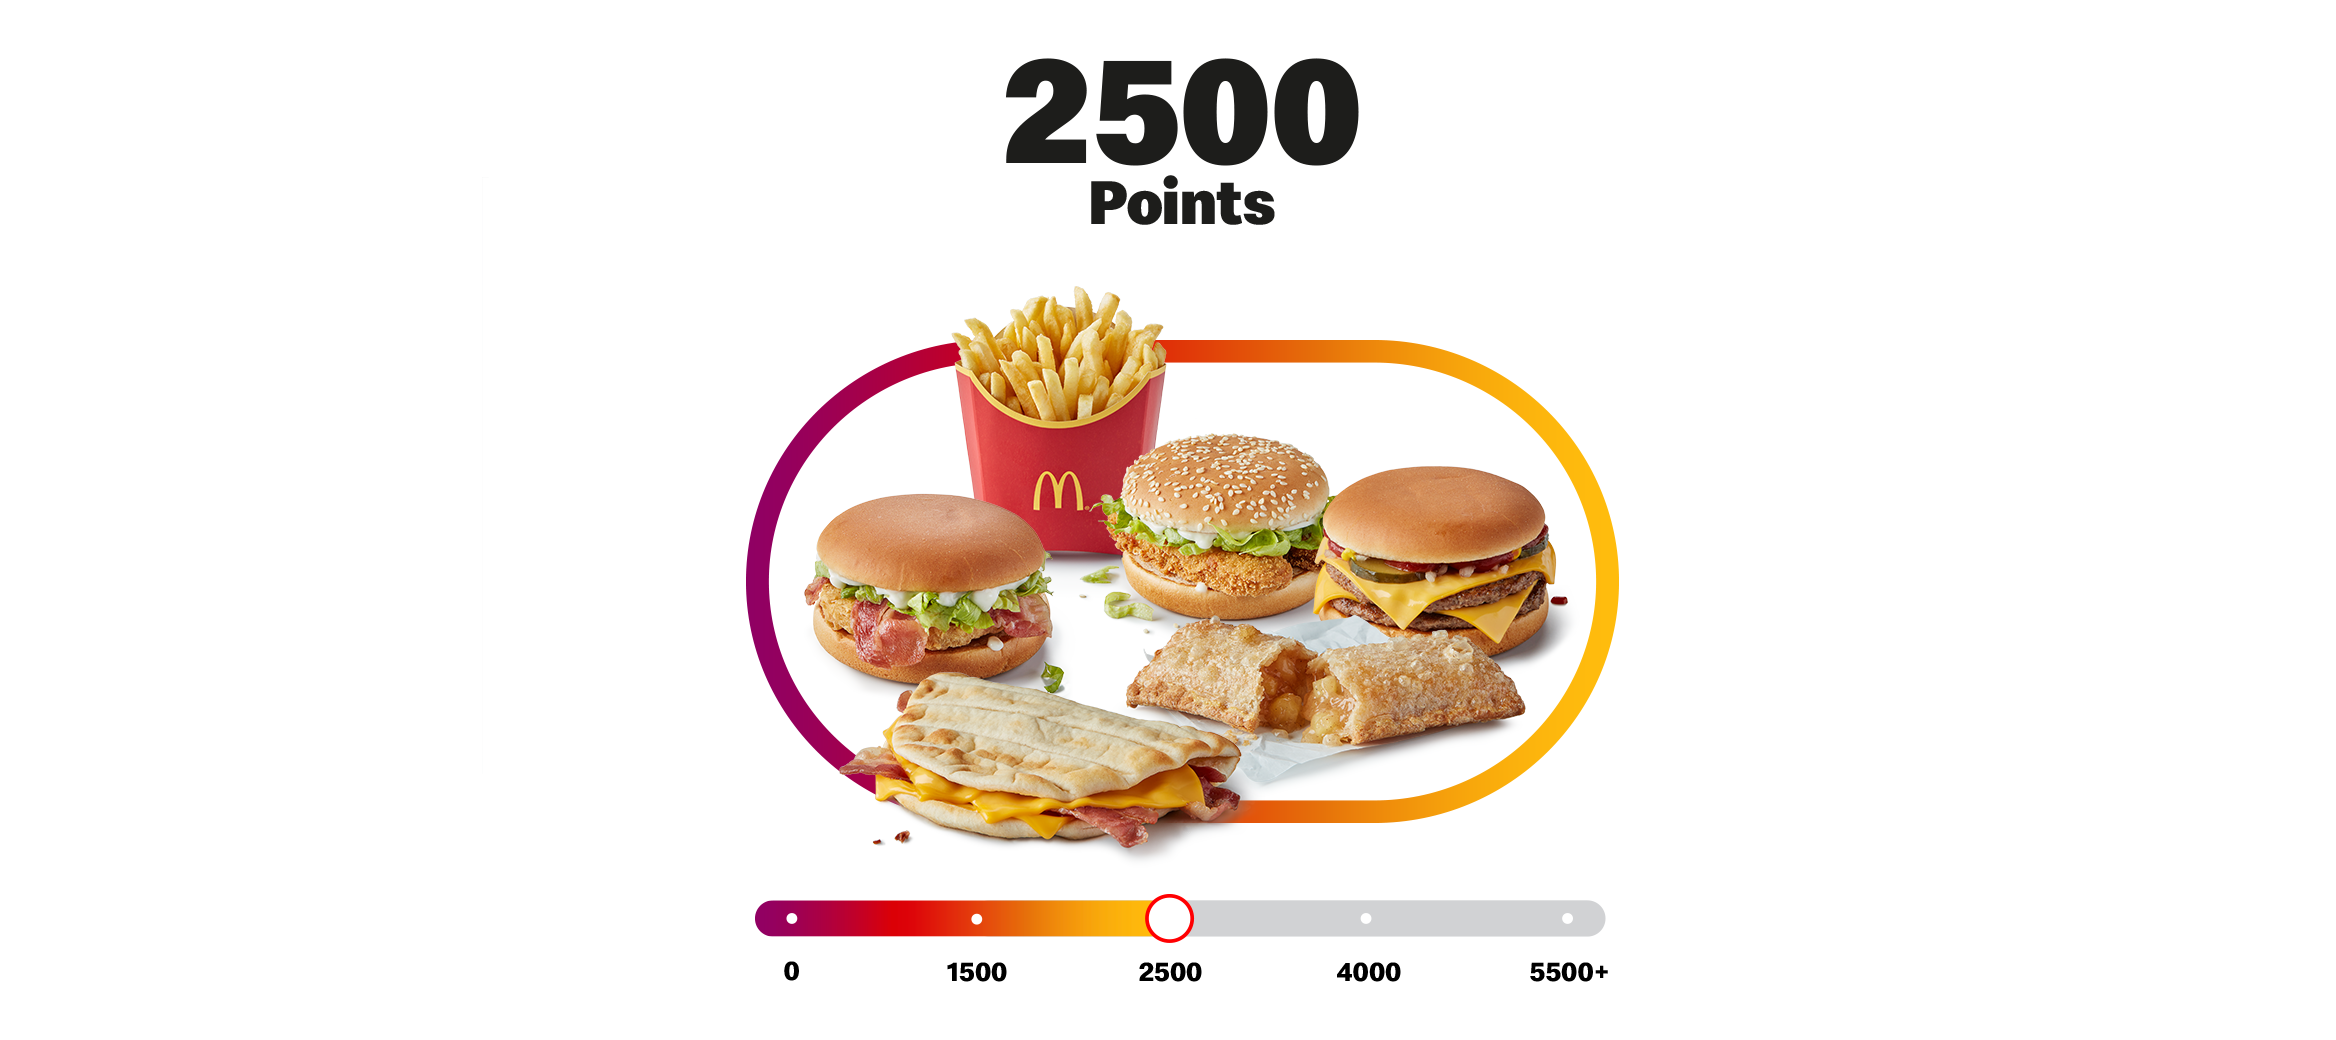 My McDonald’s Rewards points bar with 2500 points with Vegetable Deluxe, Bacon Mayo Chicken, Cheesy Bacon Flatbread, medium fries Double Cheeseburger and an apple pie.